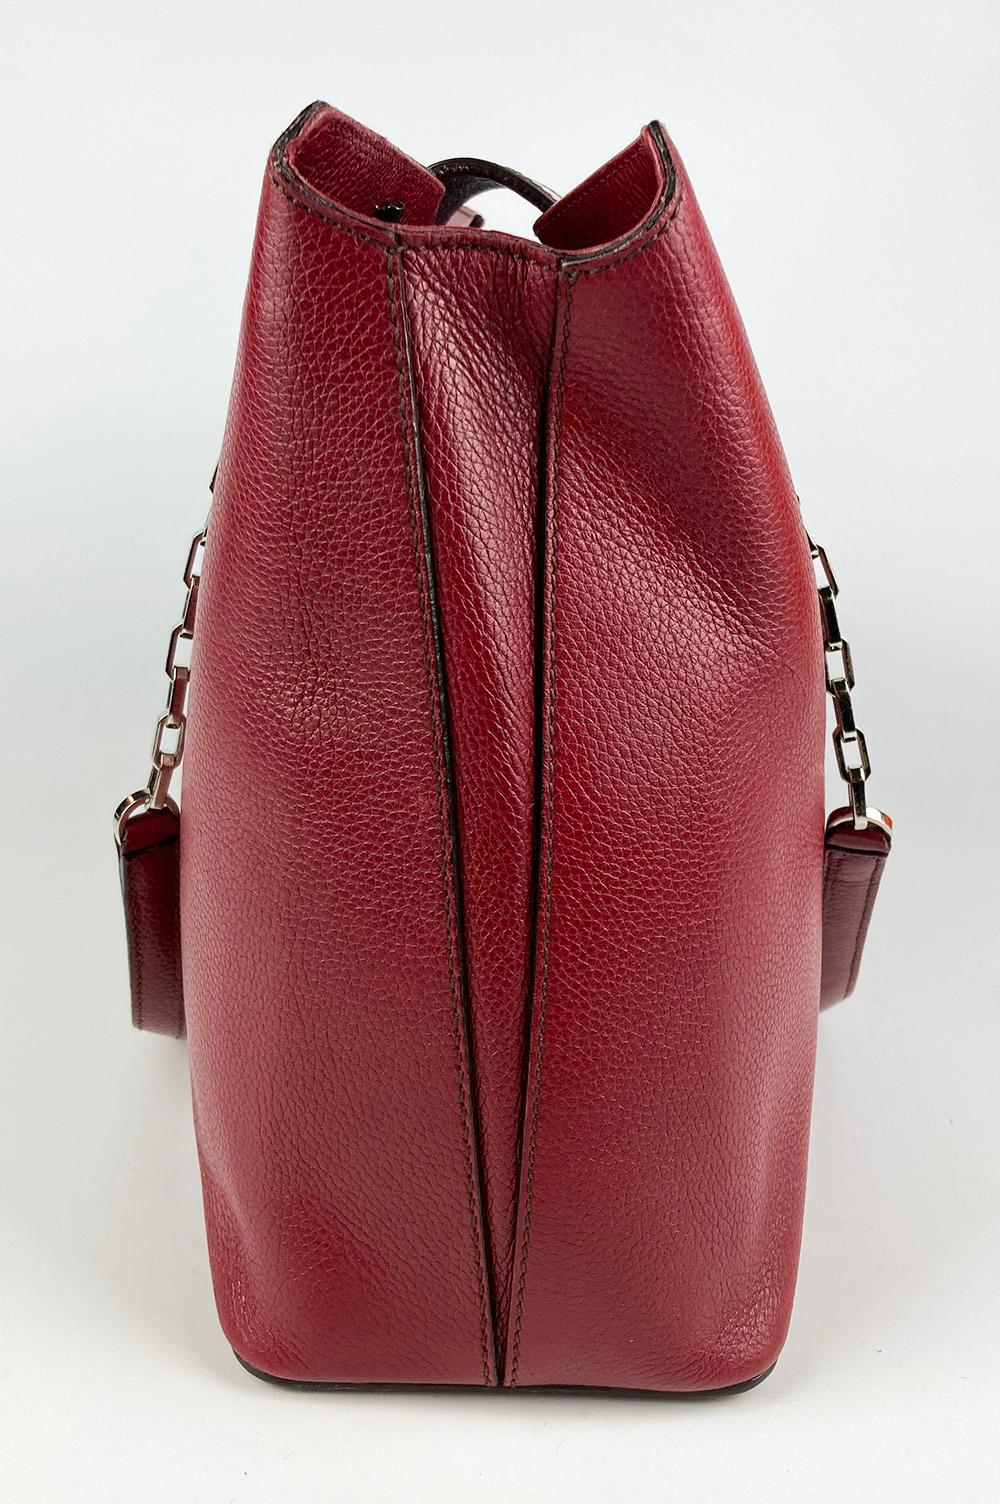 Cartier Red Leather Chain Tote In Good Condition For Sale In Philadelphia, PA